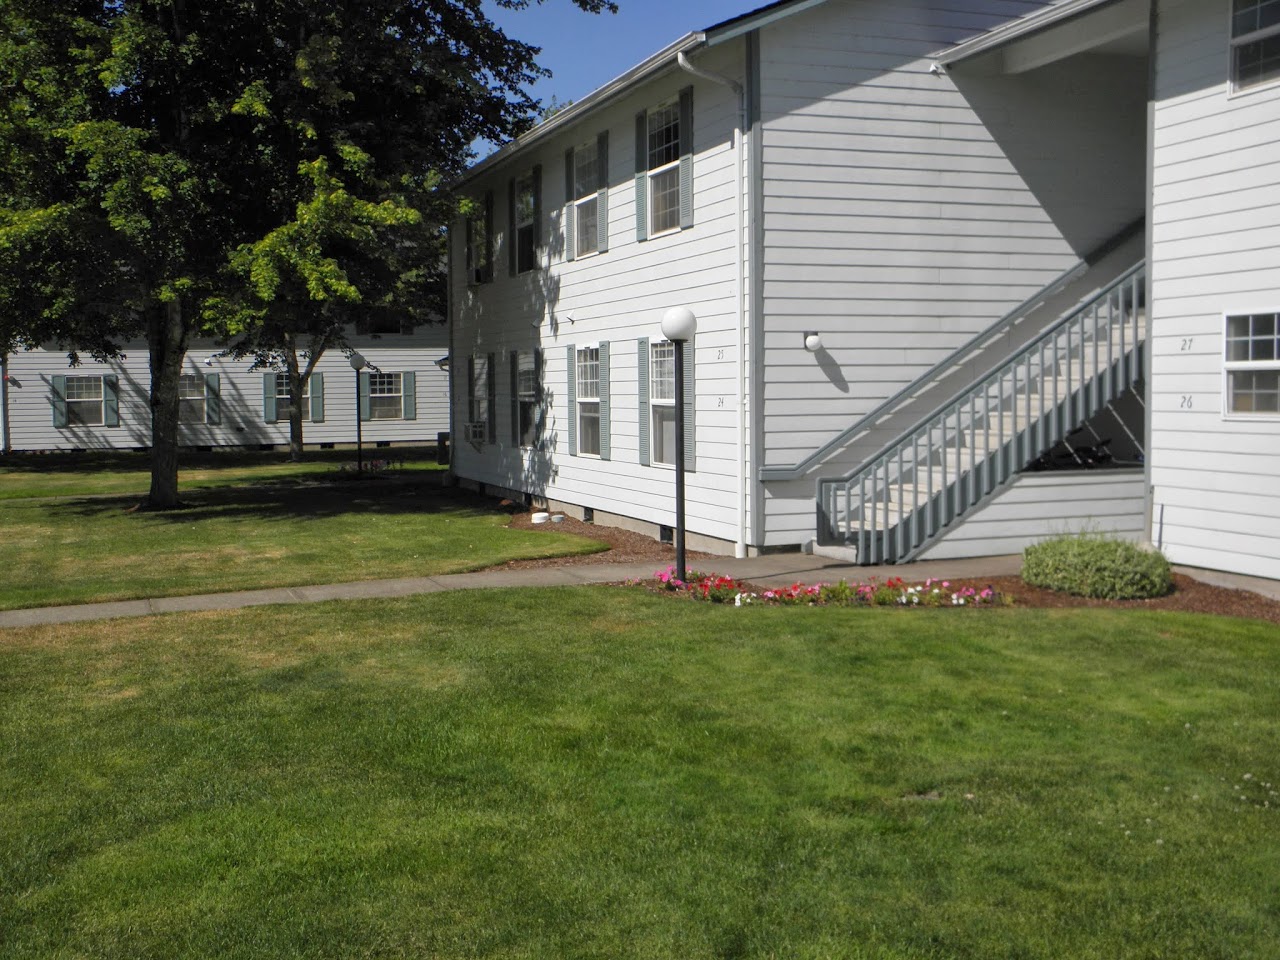 Photo of FRANKLIN PLACE APTS. Affordable housing located at 317 ECOLS ST S MONMOUTH, OR 97361